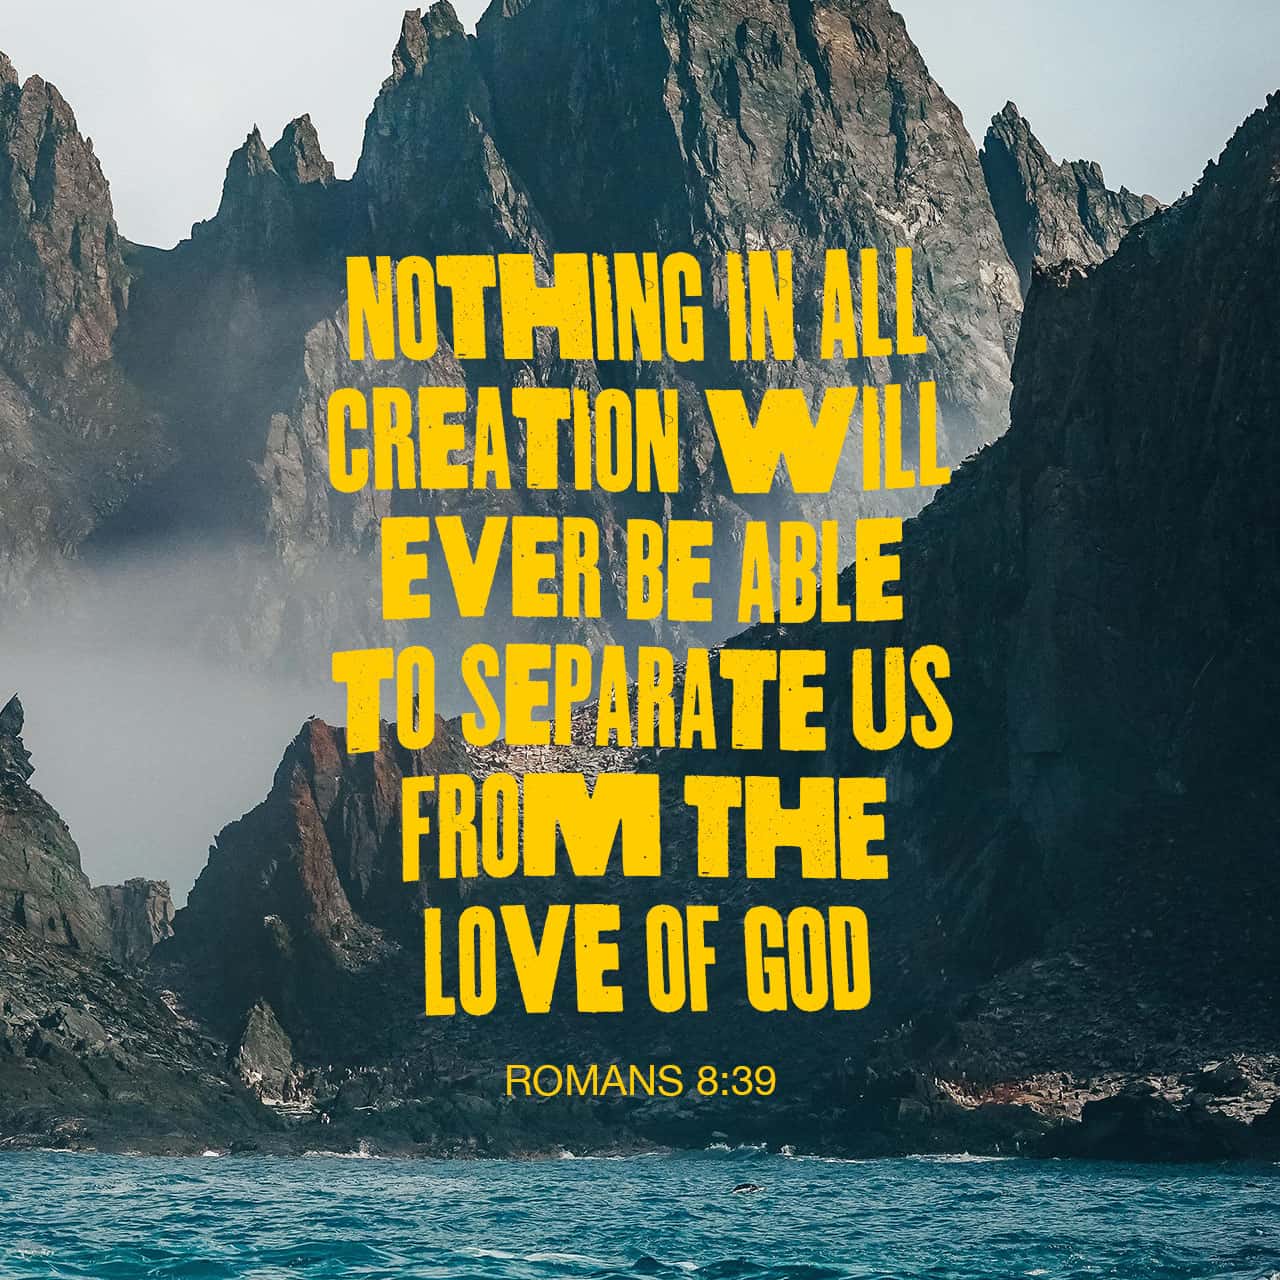 Romans 8:38-39 And I am convinced that nothing can ever separate us from  God's love. Neither death nor life, neither angels nor demons, neither our  fears for today nor our worries about